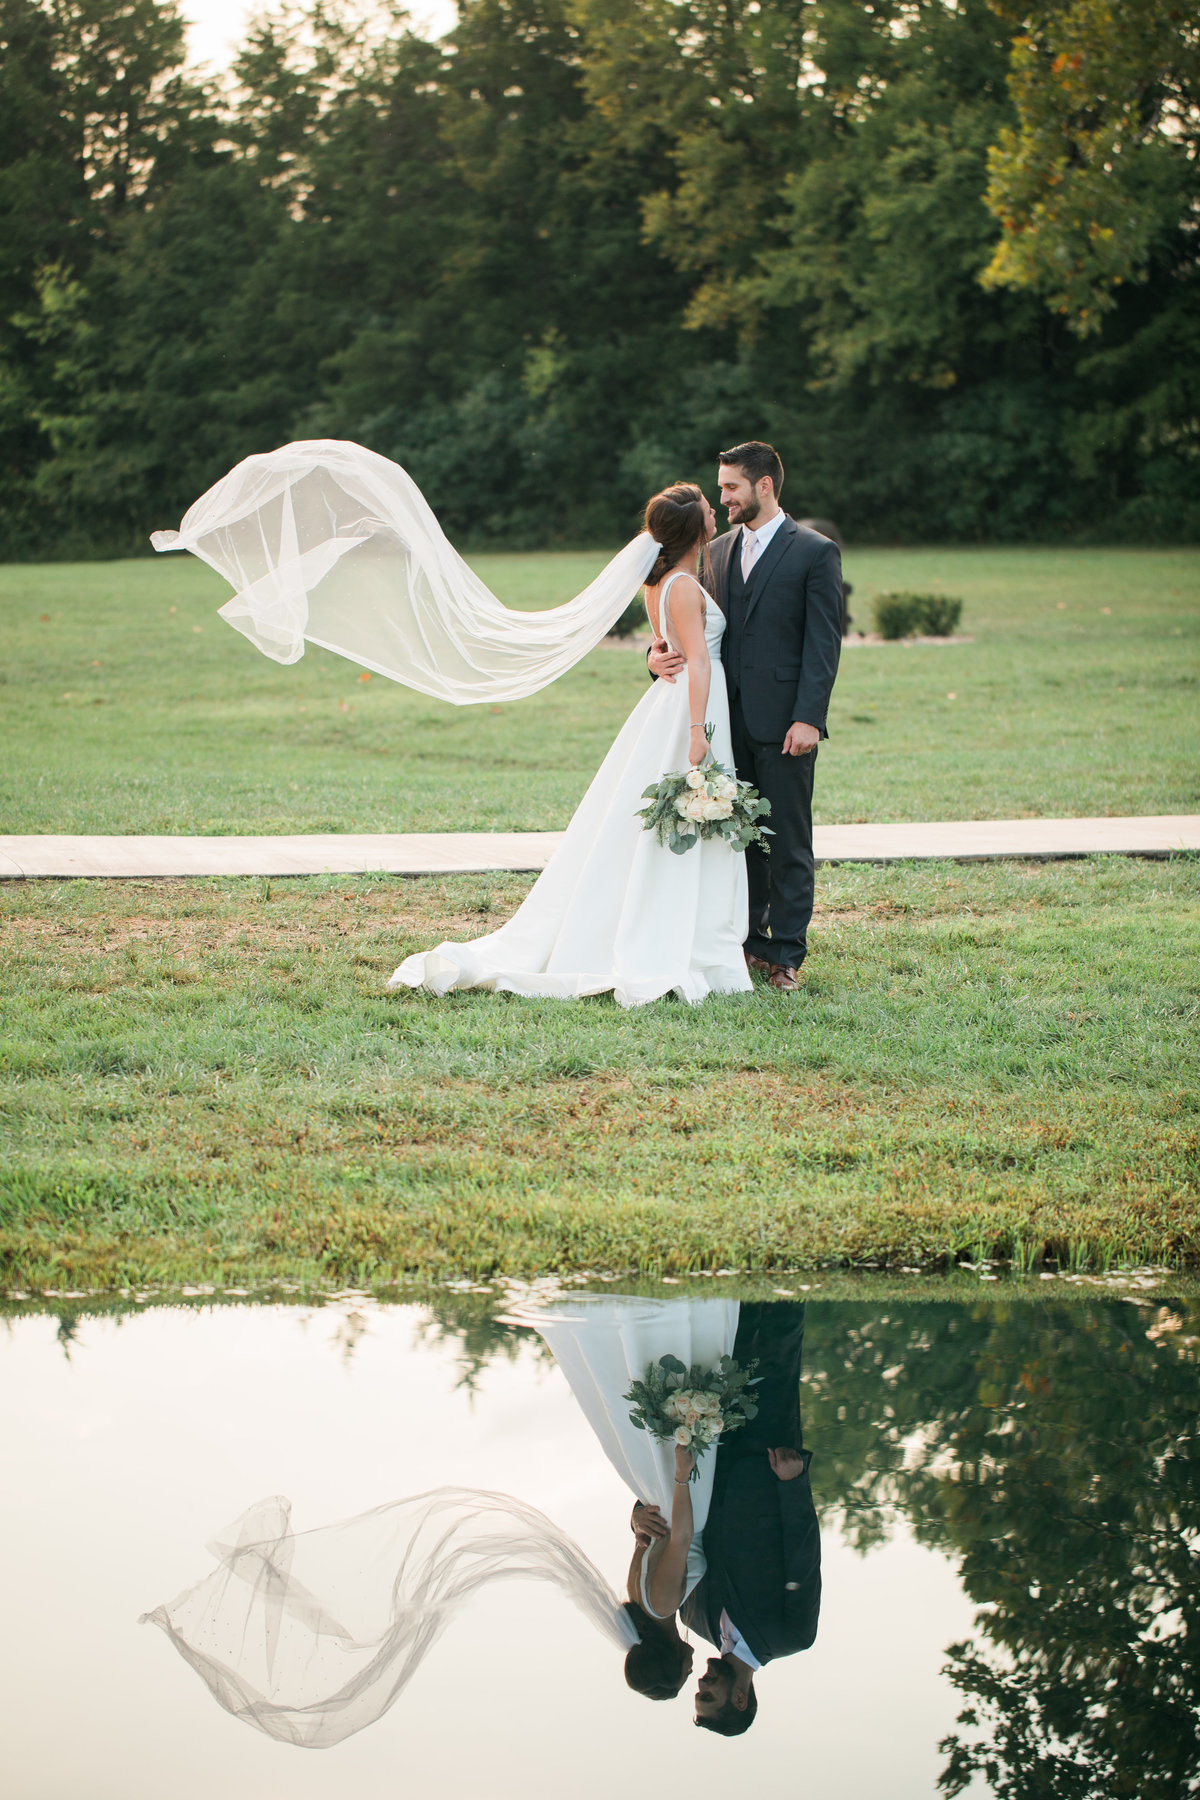 Reflection of bride and groom on lake.